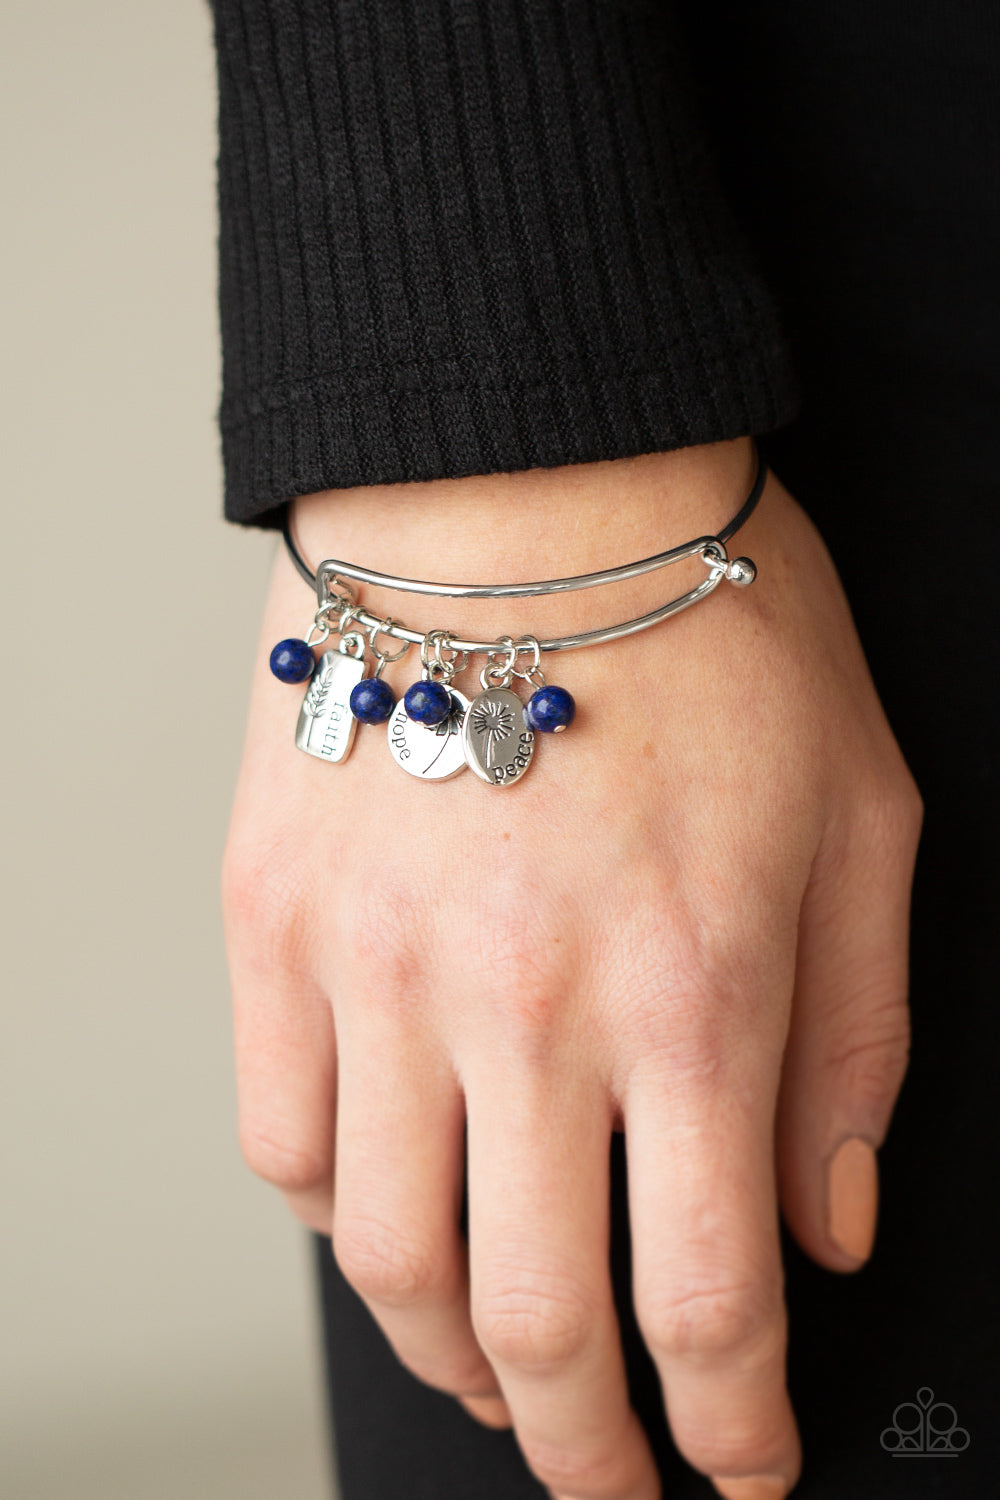 GROWING Strong Blue Inspirational Bracelet - Paparazzi Accessories  Glassy blue stone beads and silver floral charms stamped in the words, "faith," "hope," and "peace," glide along a dainty bangle-like cuff around the wrist for a whimsical flair. Features an adjustable toggle closure.  All Paparazzi Accessories are lead free and nickel free!  Sold as one individual bracelet.